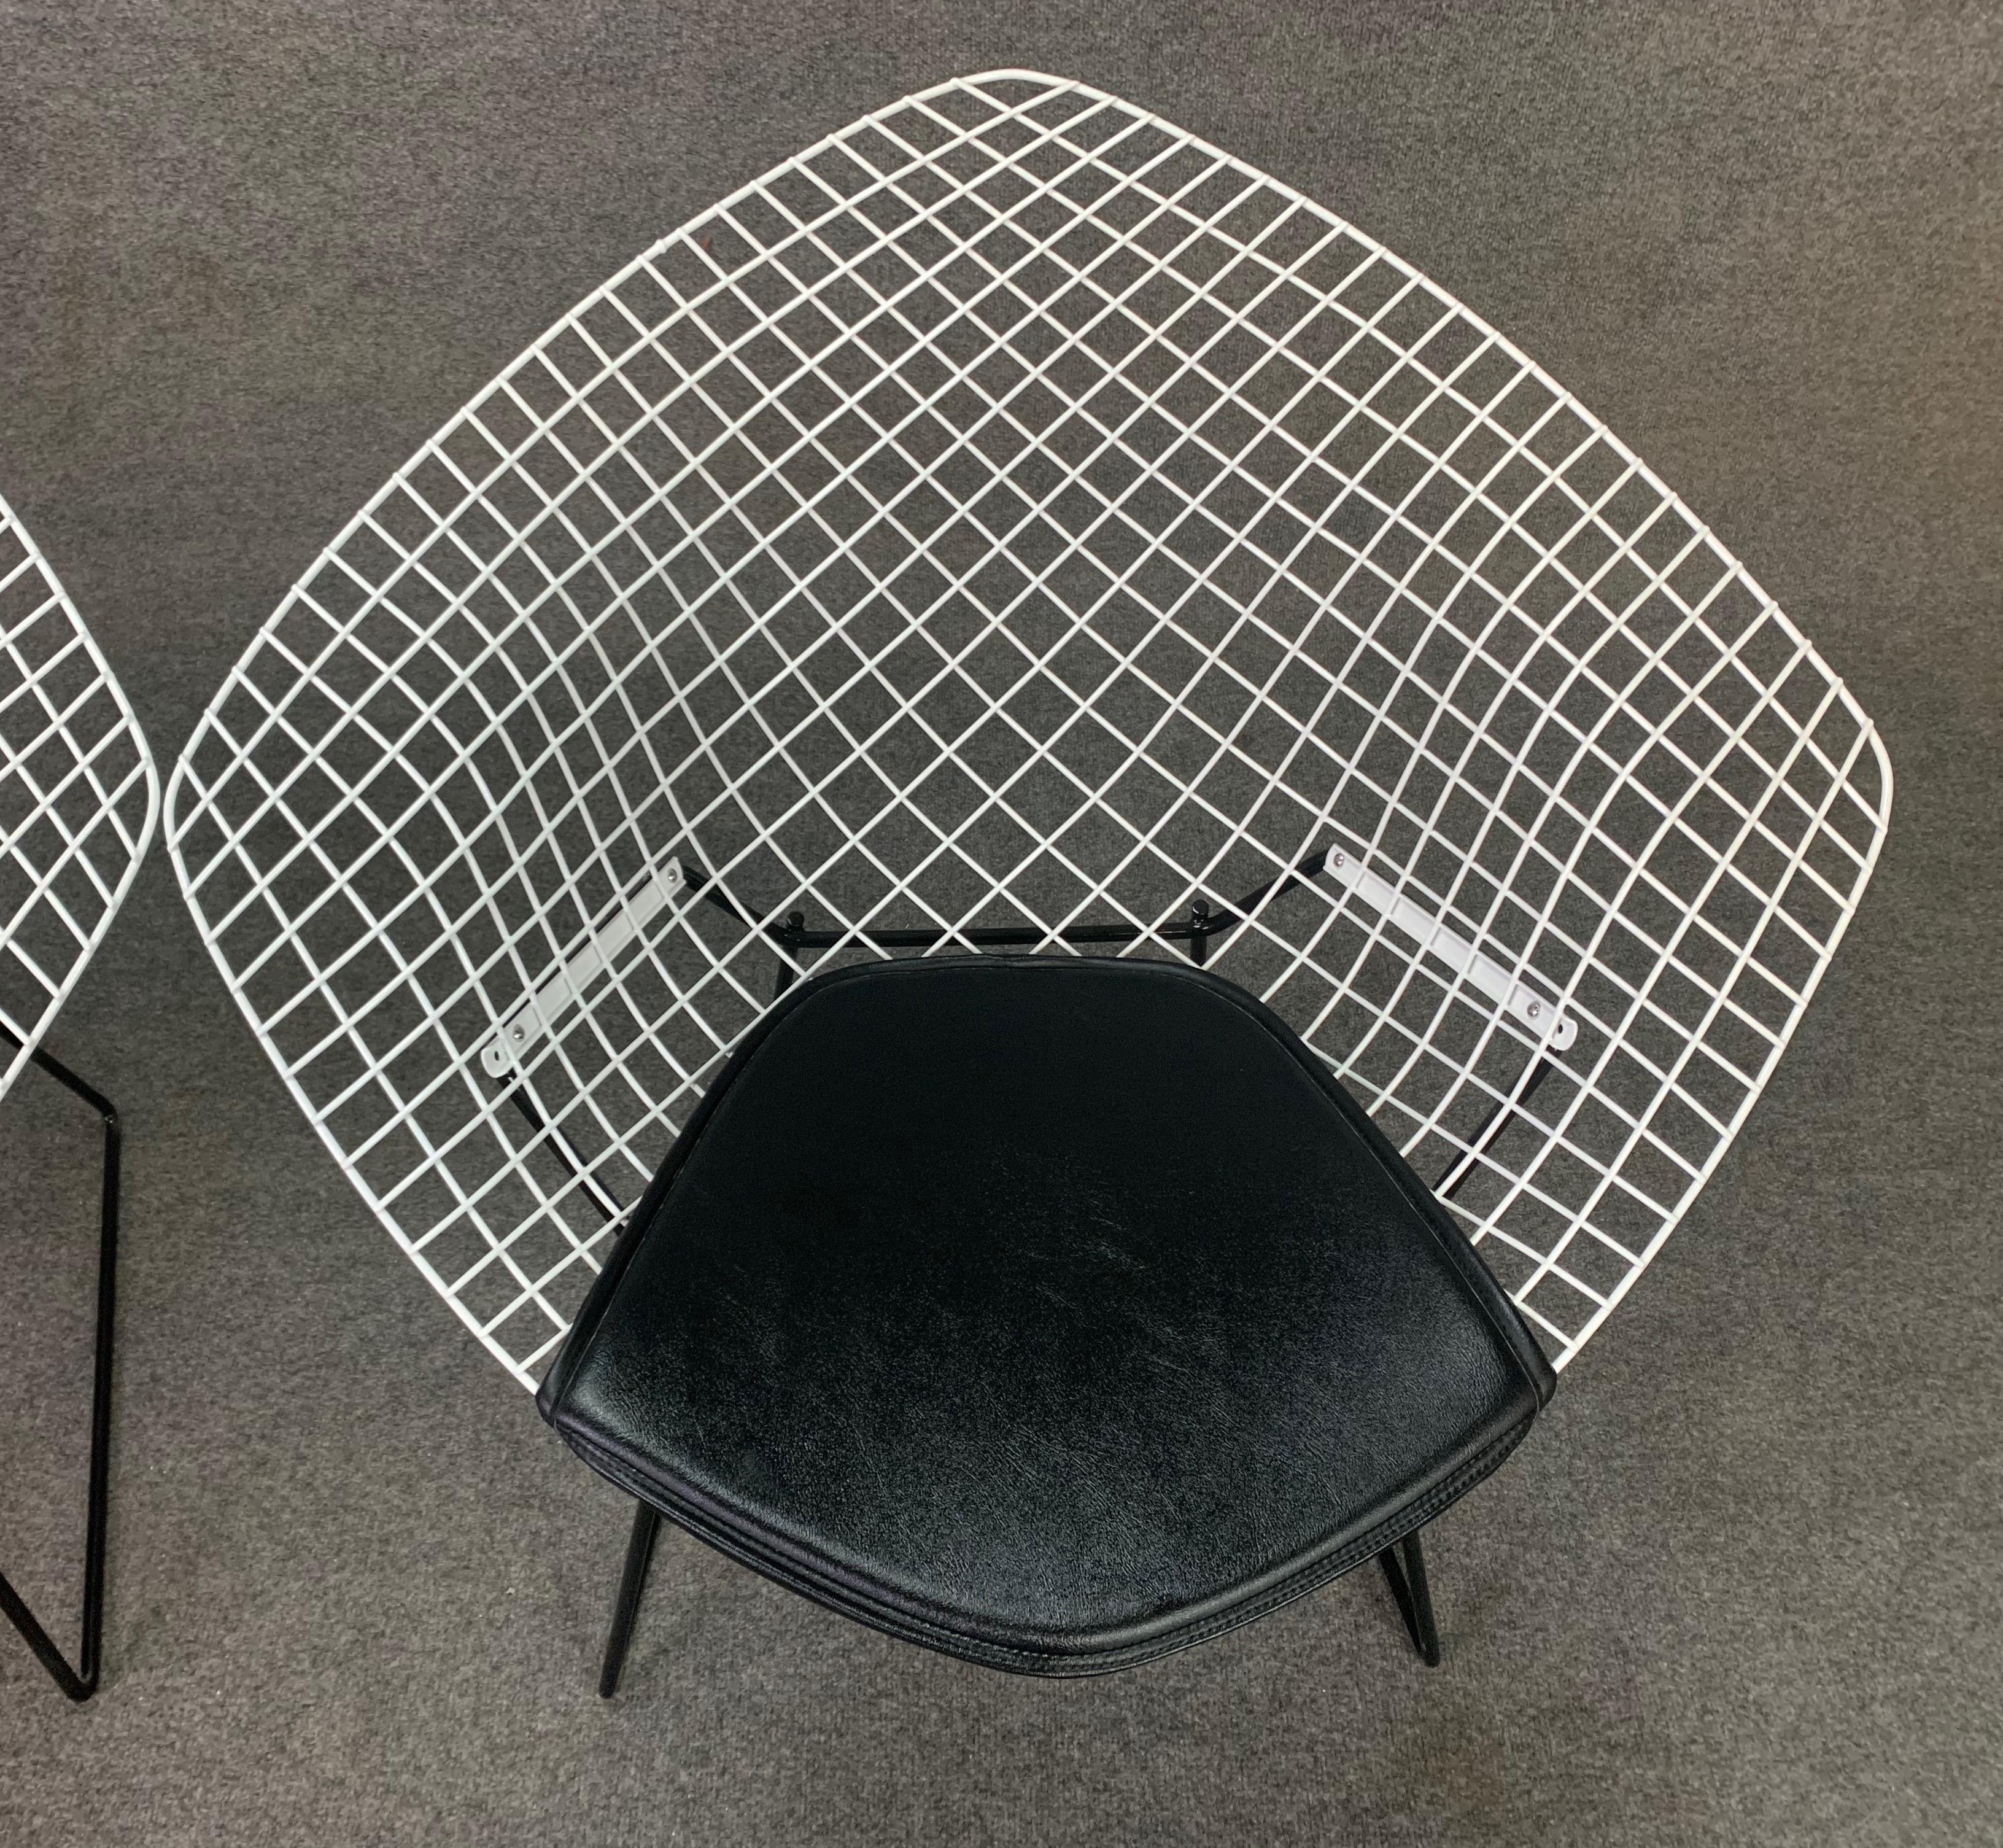 American Pair of Vintage Mid-Century Modern Diamond Chairs by Harry Bertoia for Knoll